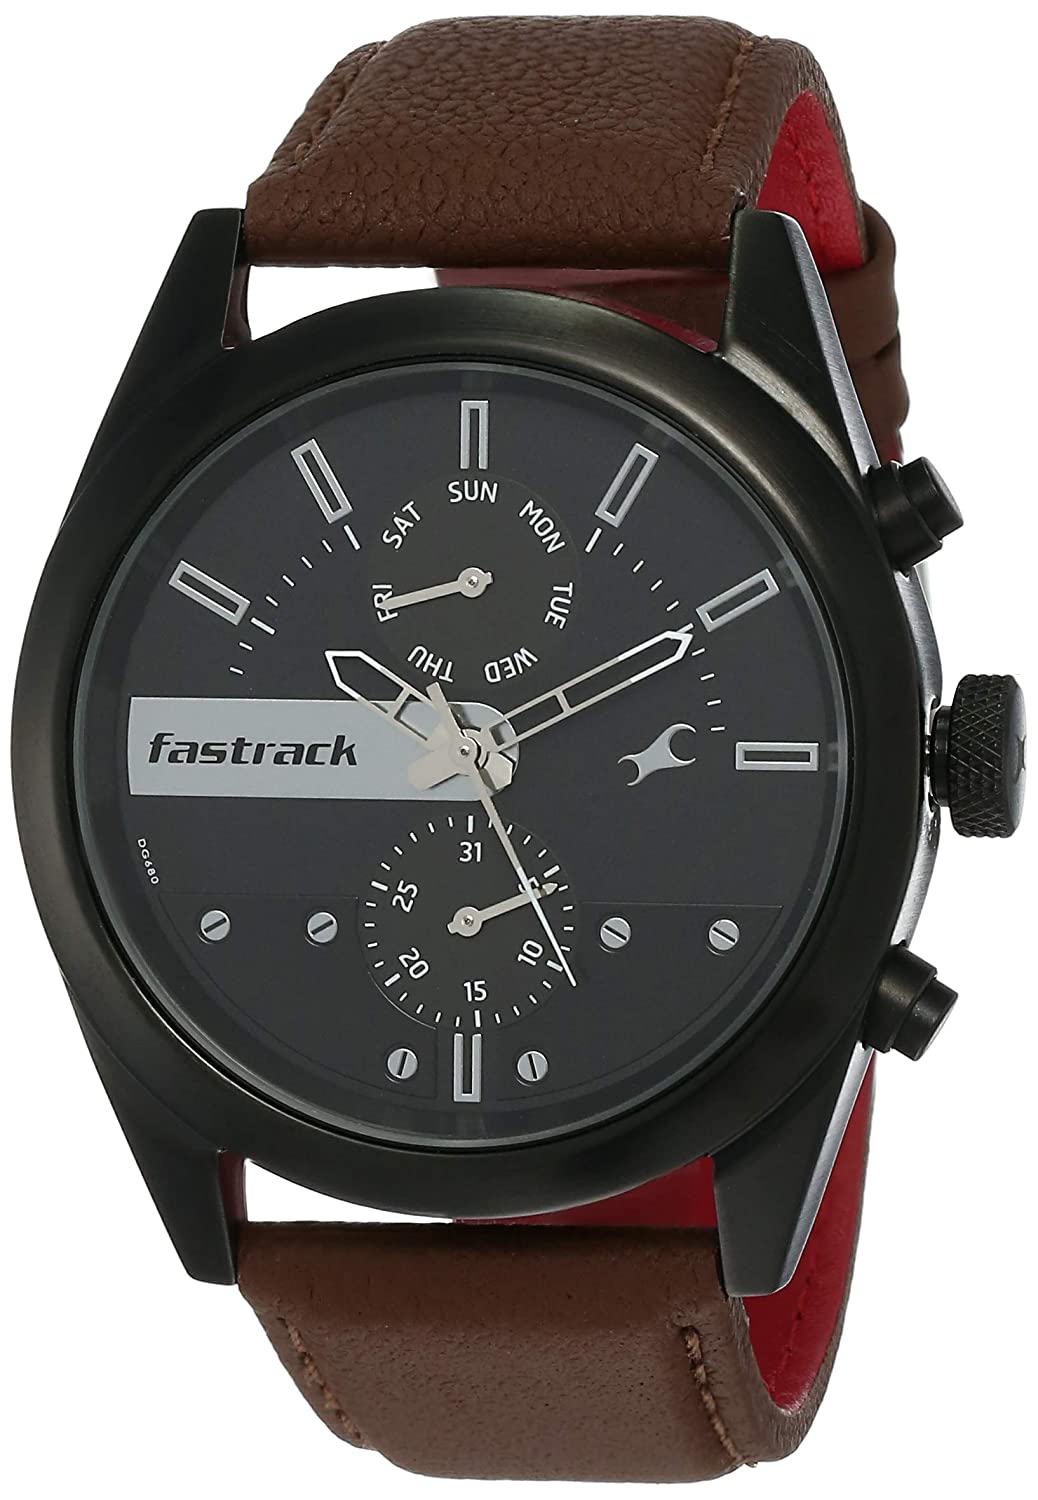 Fastrack Analog Men's Watch 3165NL01 | Leather Band | Water-Resistant | Quartz Movement | Classic Style | Fashionable | Durable | Affordable | Halabh.com